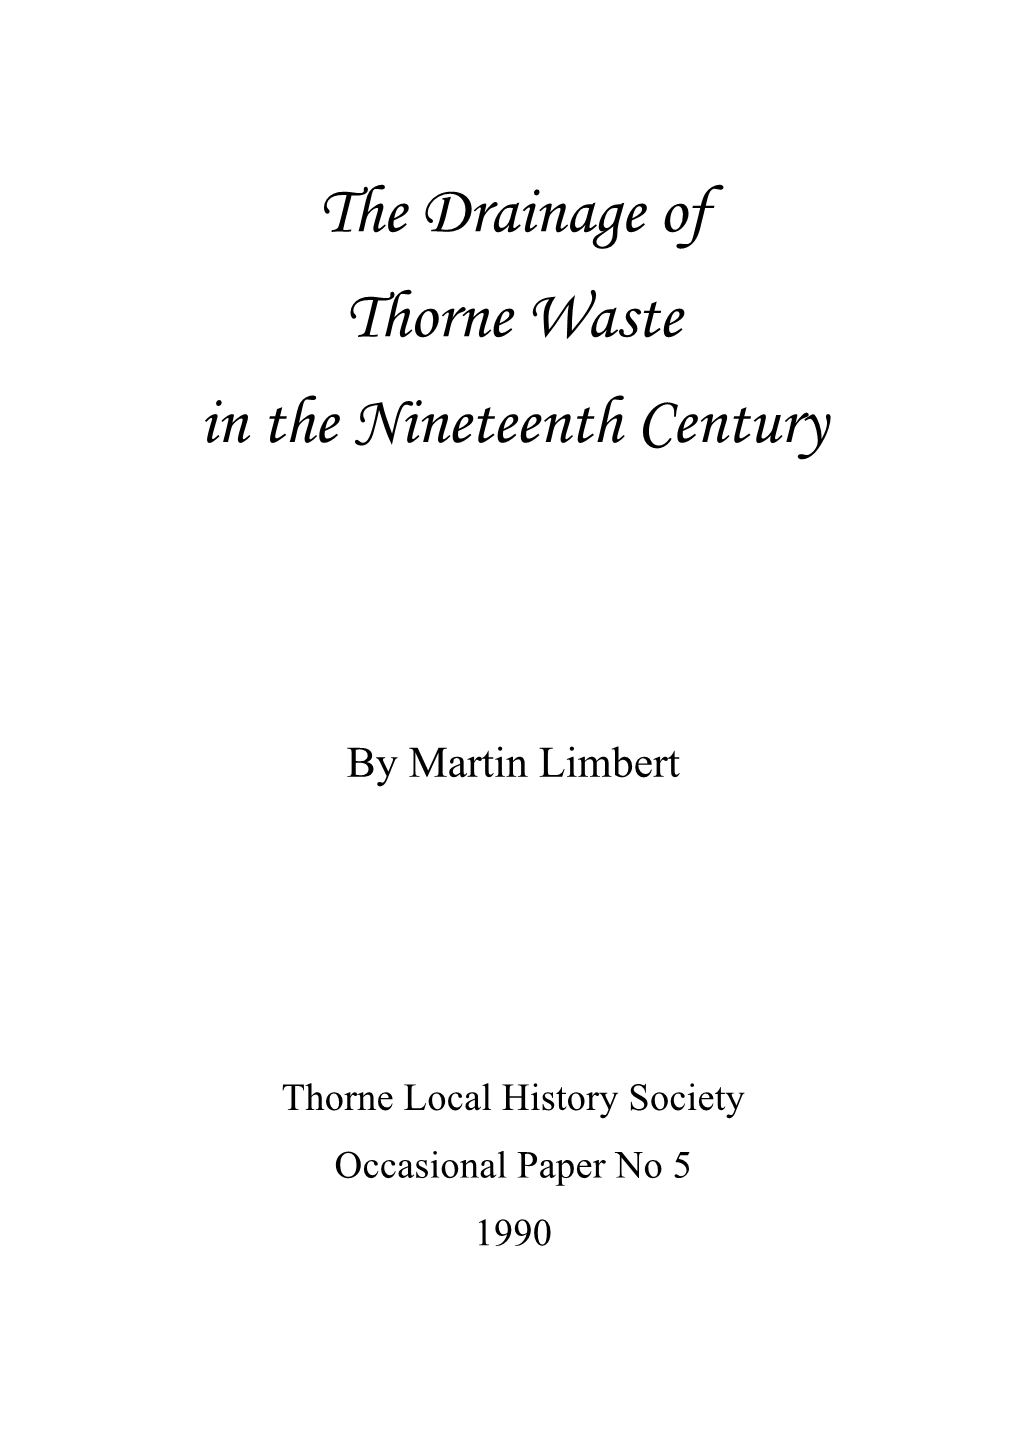 5 the Drainage of Thorne Waste in Nineteenth Century Final A5